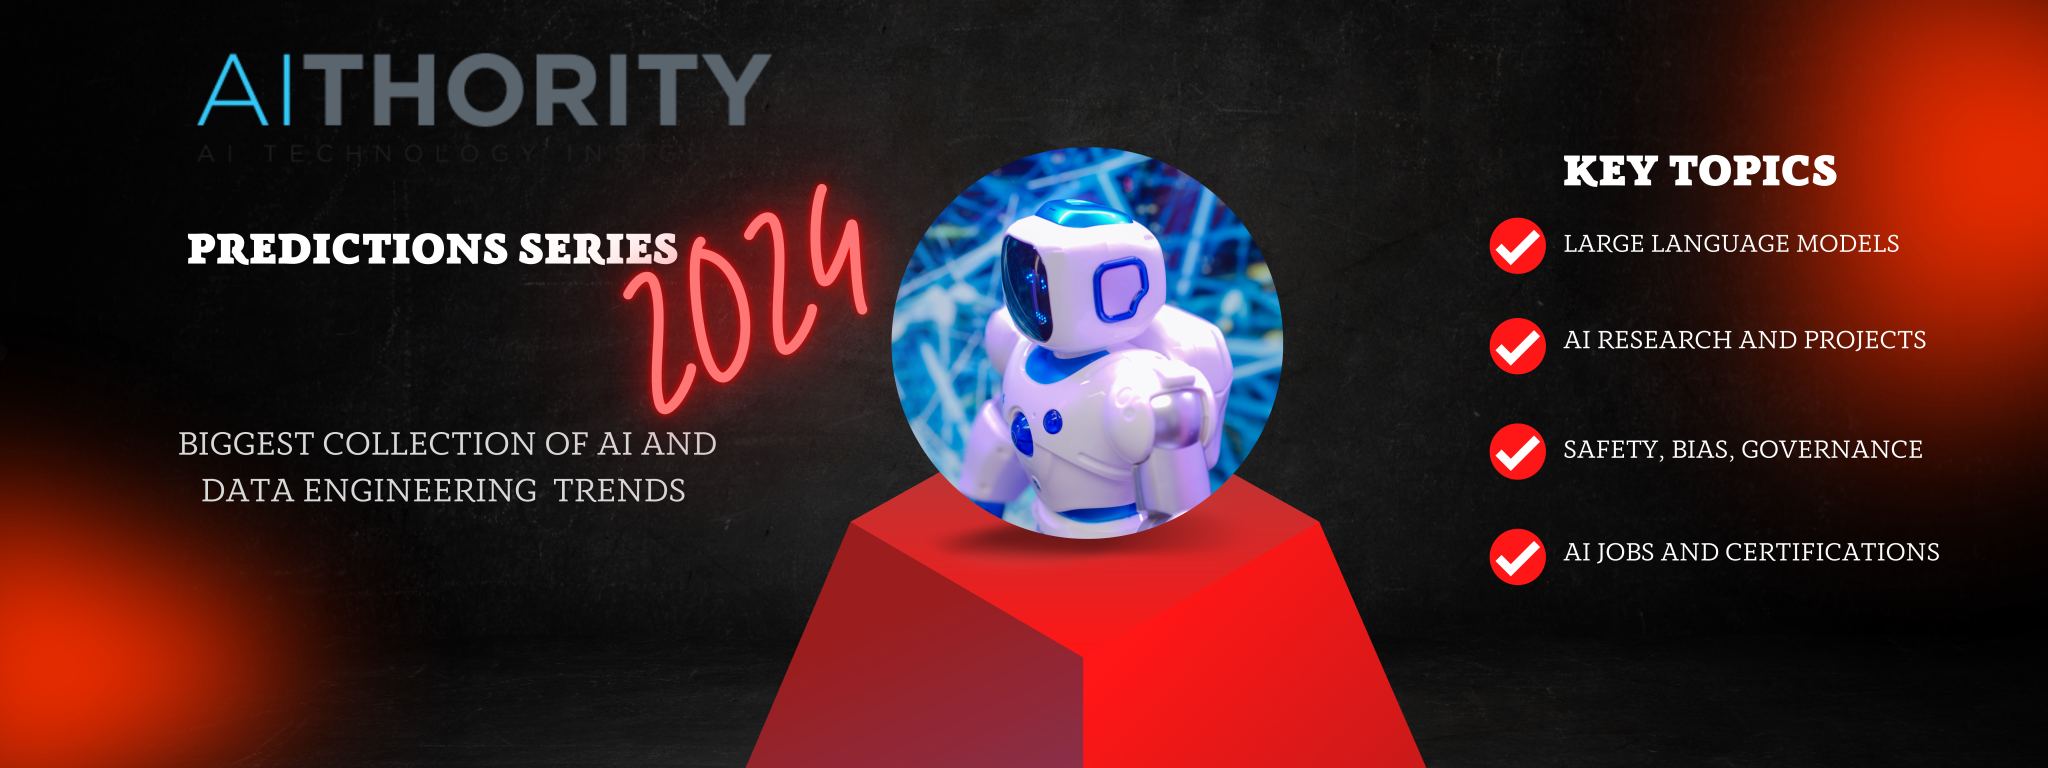 AIThority-Predictions-Series-2024-banner-1-2048x768.png